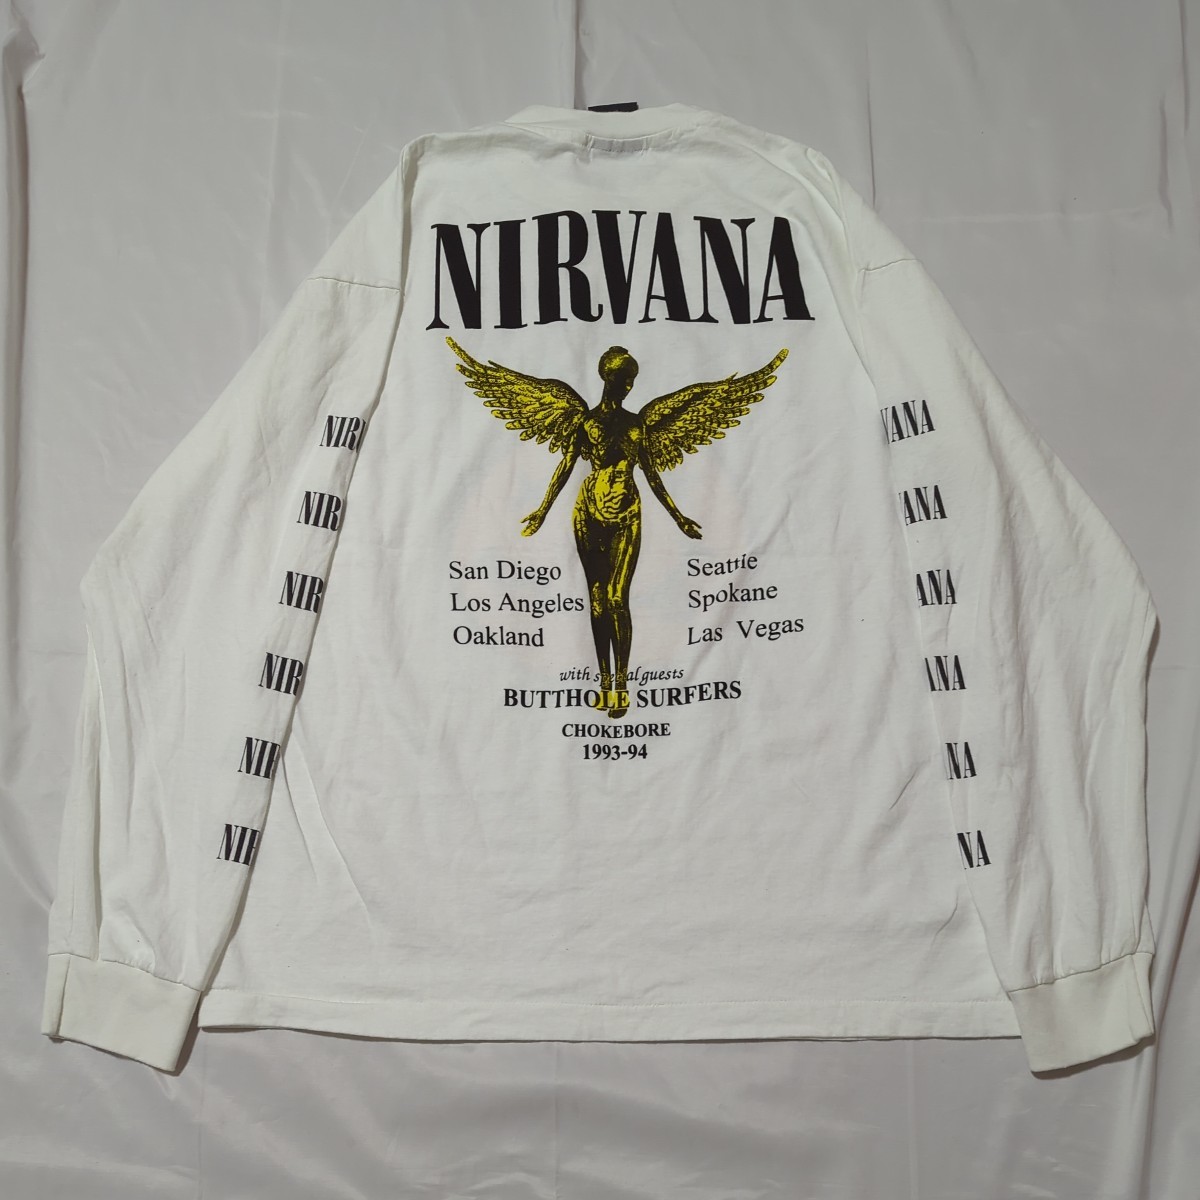 USA製 NIRVANA ニルヴァーナ カートコバーン sonic youth Pink Floyd METALLICA メタリカ hiphop ロンTEE Oasis オアシス nevermind_画像2